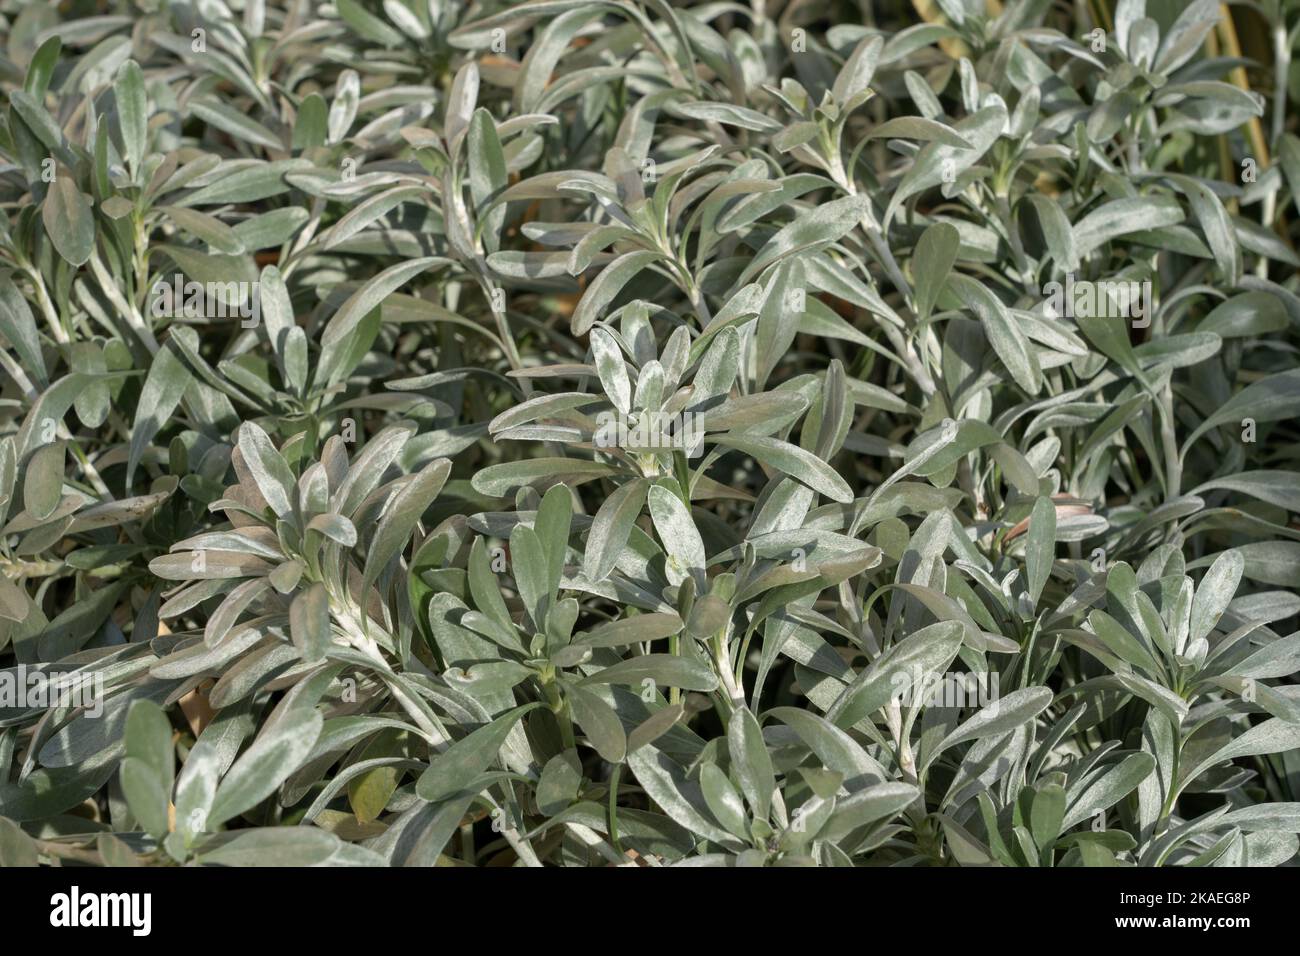 Closeup view of silver green foliage of convolvulus cneorum aka silverbush or shrubby bindweed outdoors in sunlight Stock Photo